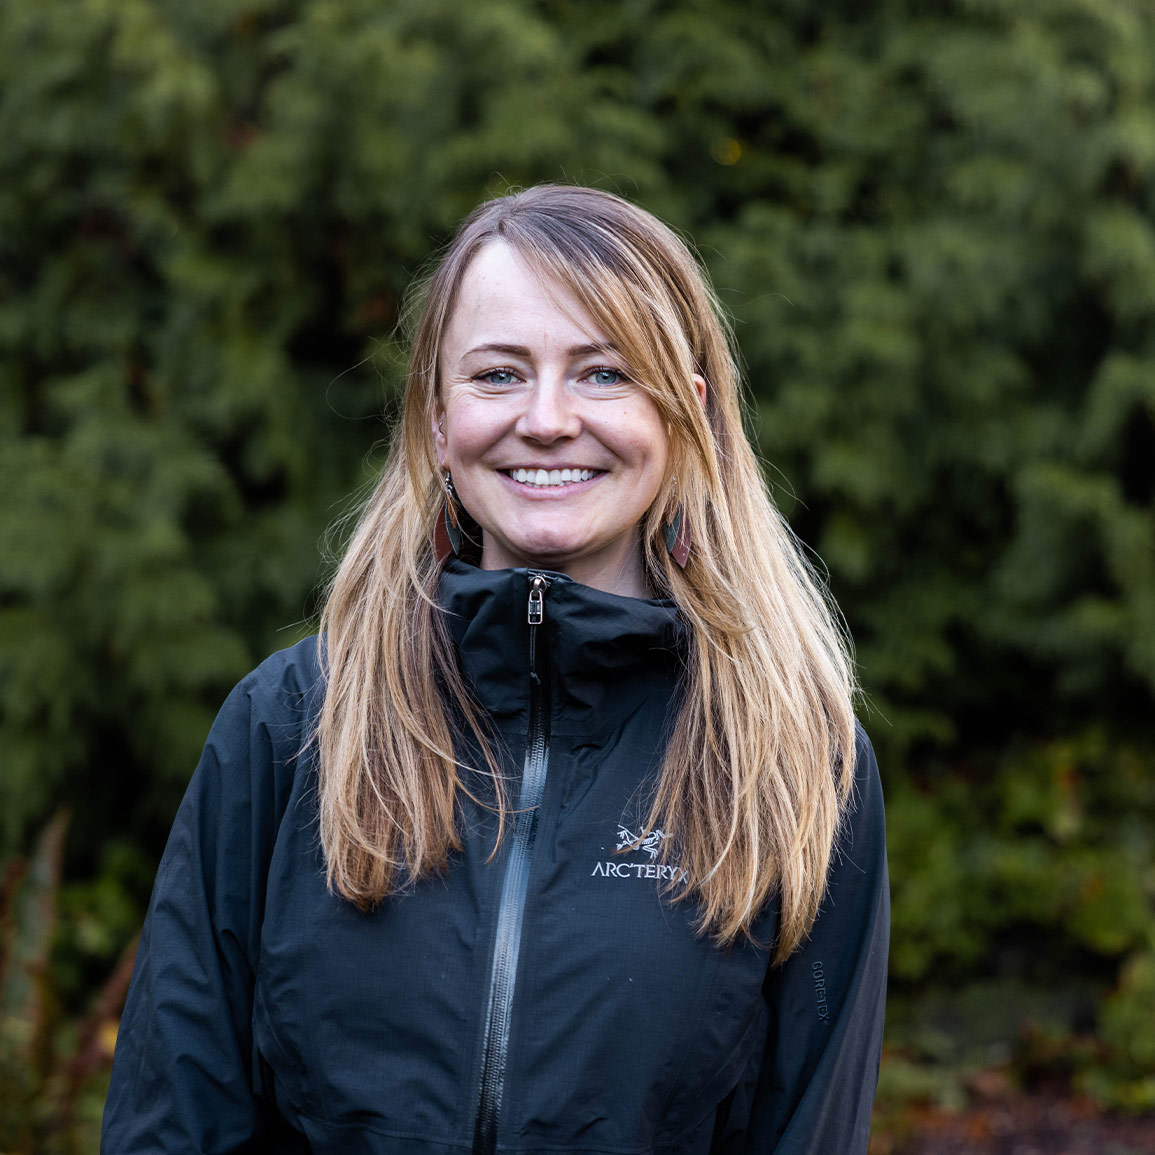 Kate Field, a team member of Raincoast, standing against a blurred backdrop of green cedar trees, looking at the camera smiling and wearing a black jacket that constrasts with her bright eyes and blonde hair.